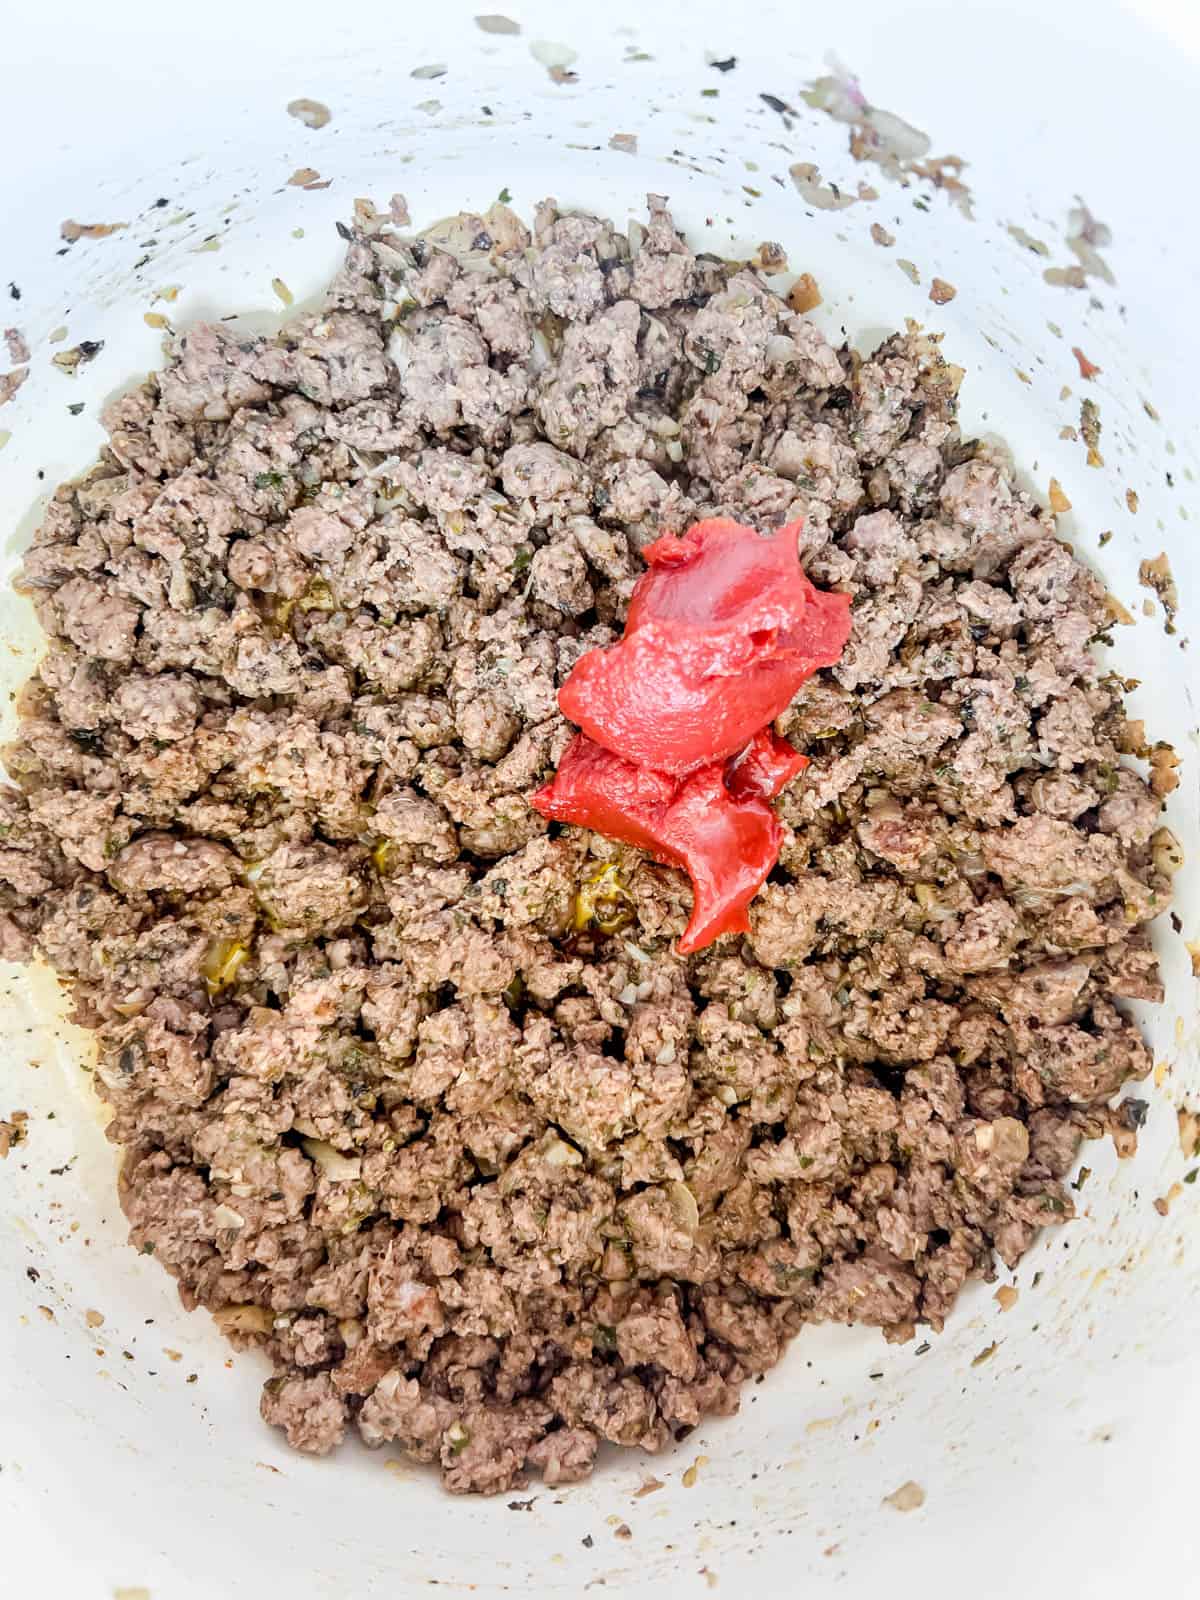 Tomato paste added to ground beef in a pan.